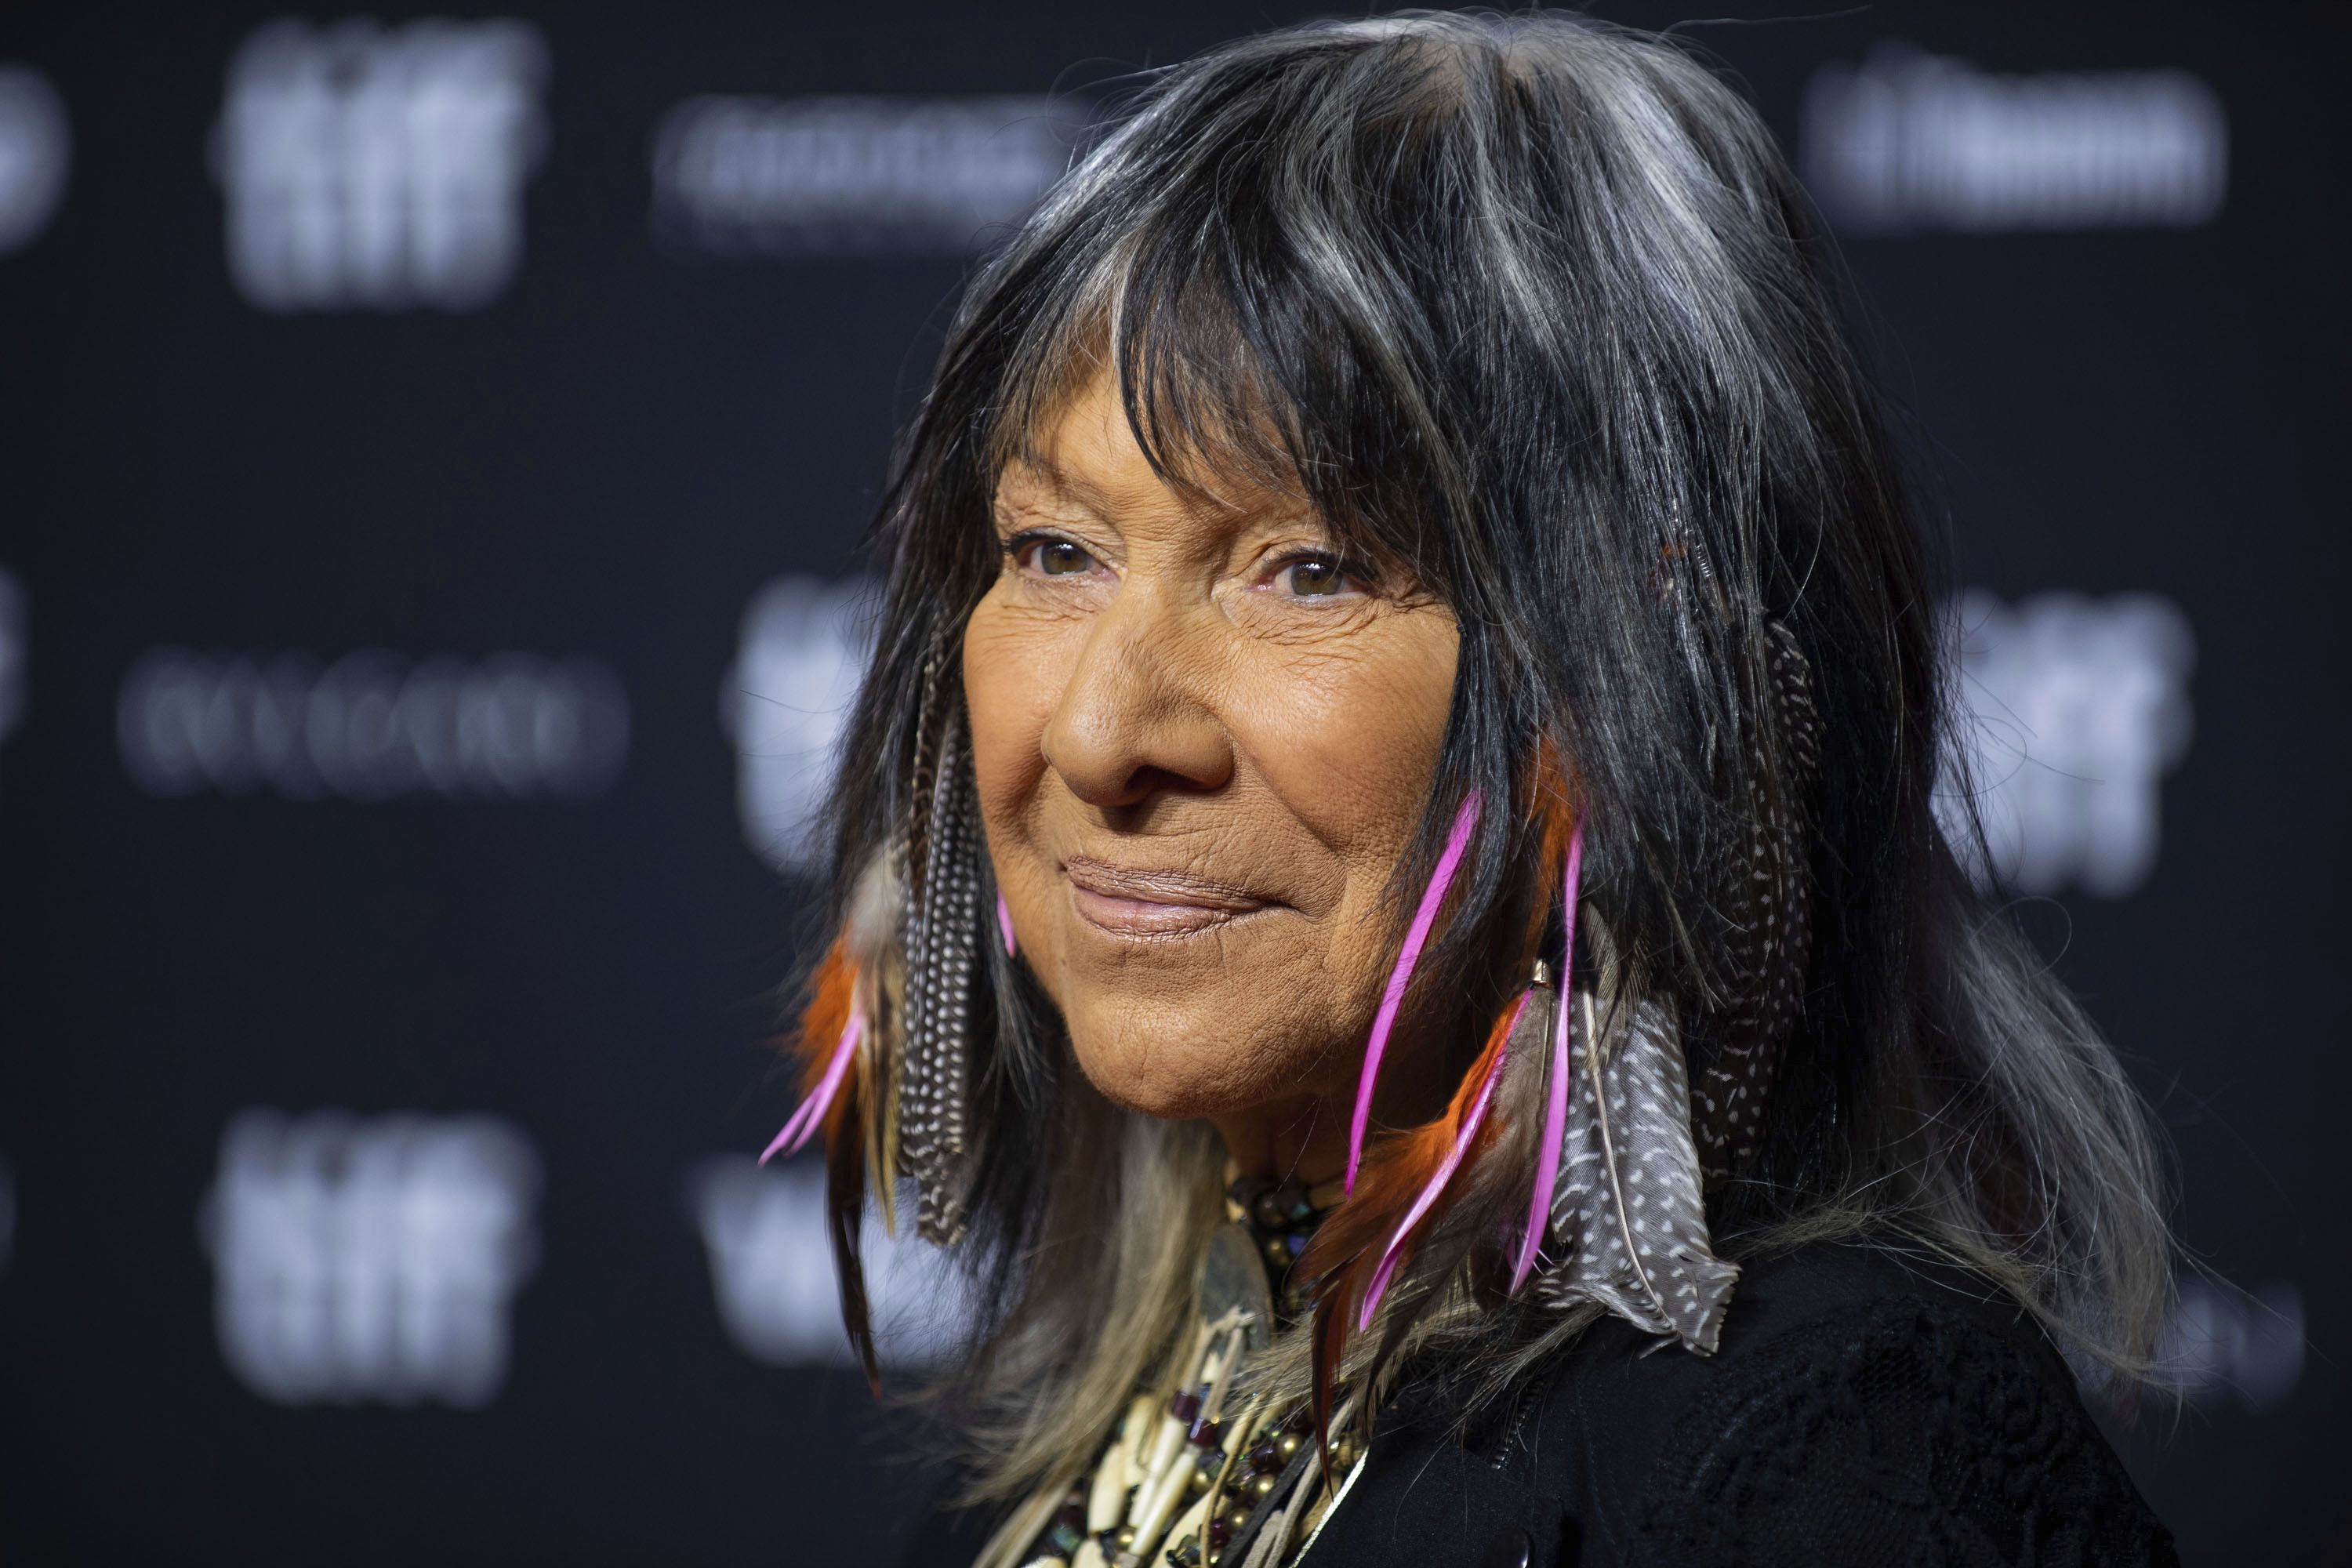 Buffy Sainte-Marie is the latest public figure accused of being a